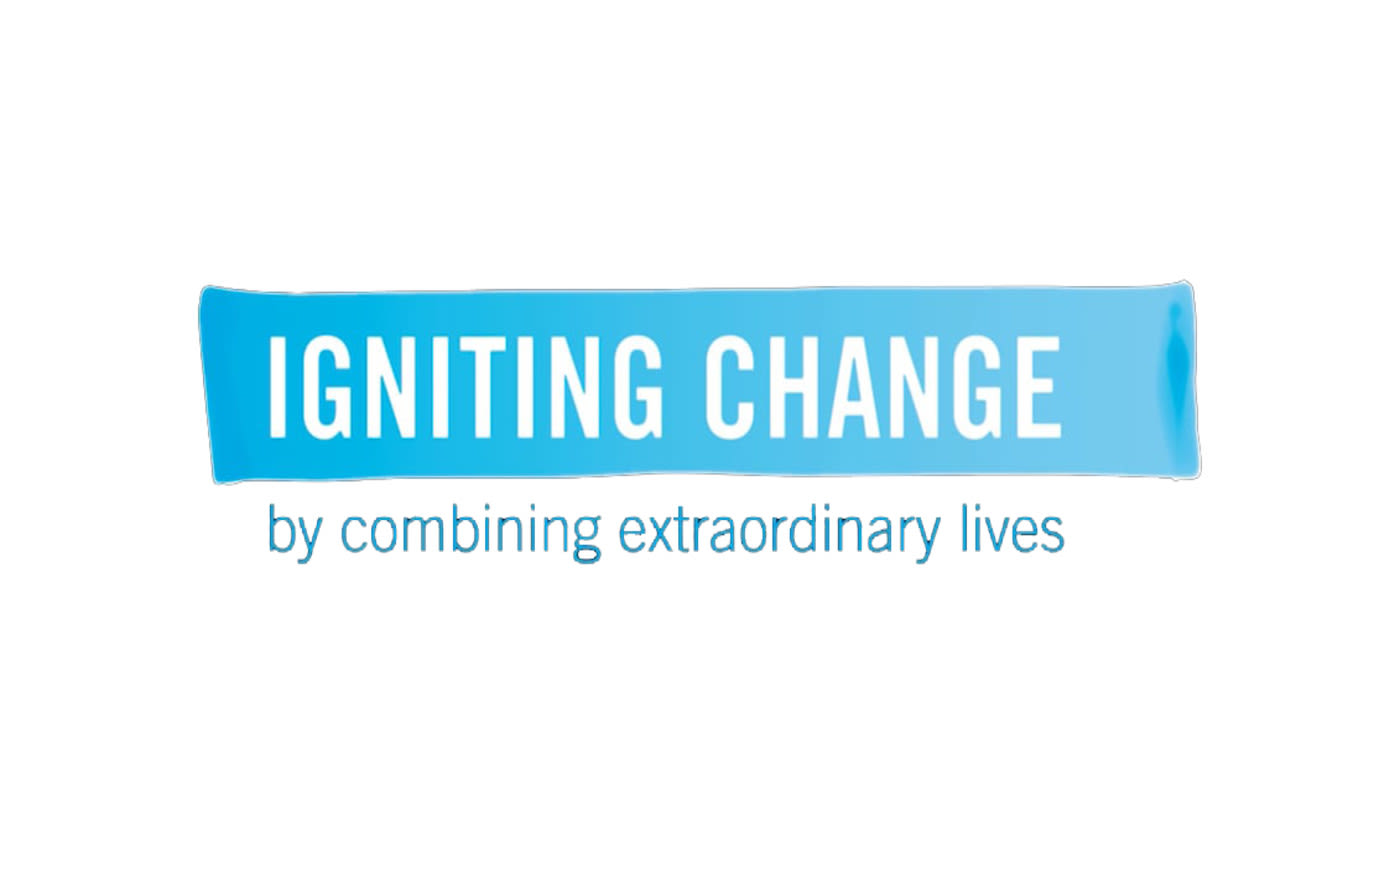 White text on a blue background that says 'Igniting change', above blue text on a white background that says 'by combining extraordinary lives'